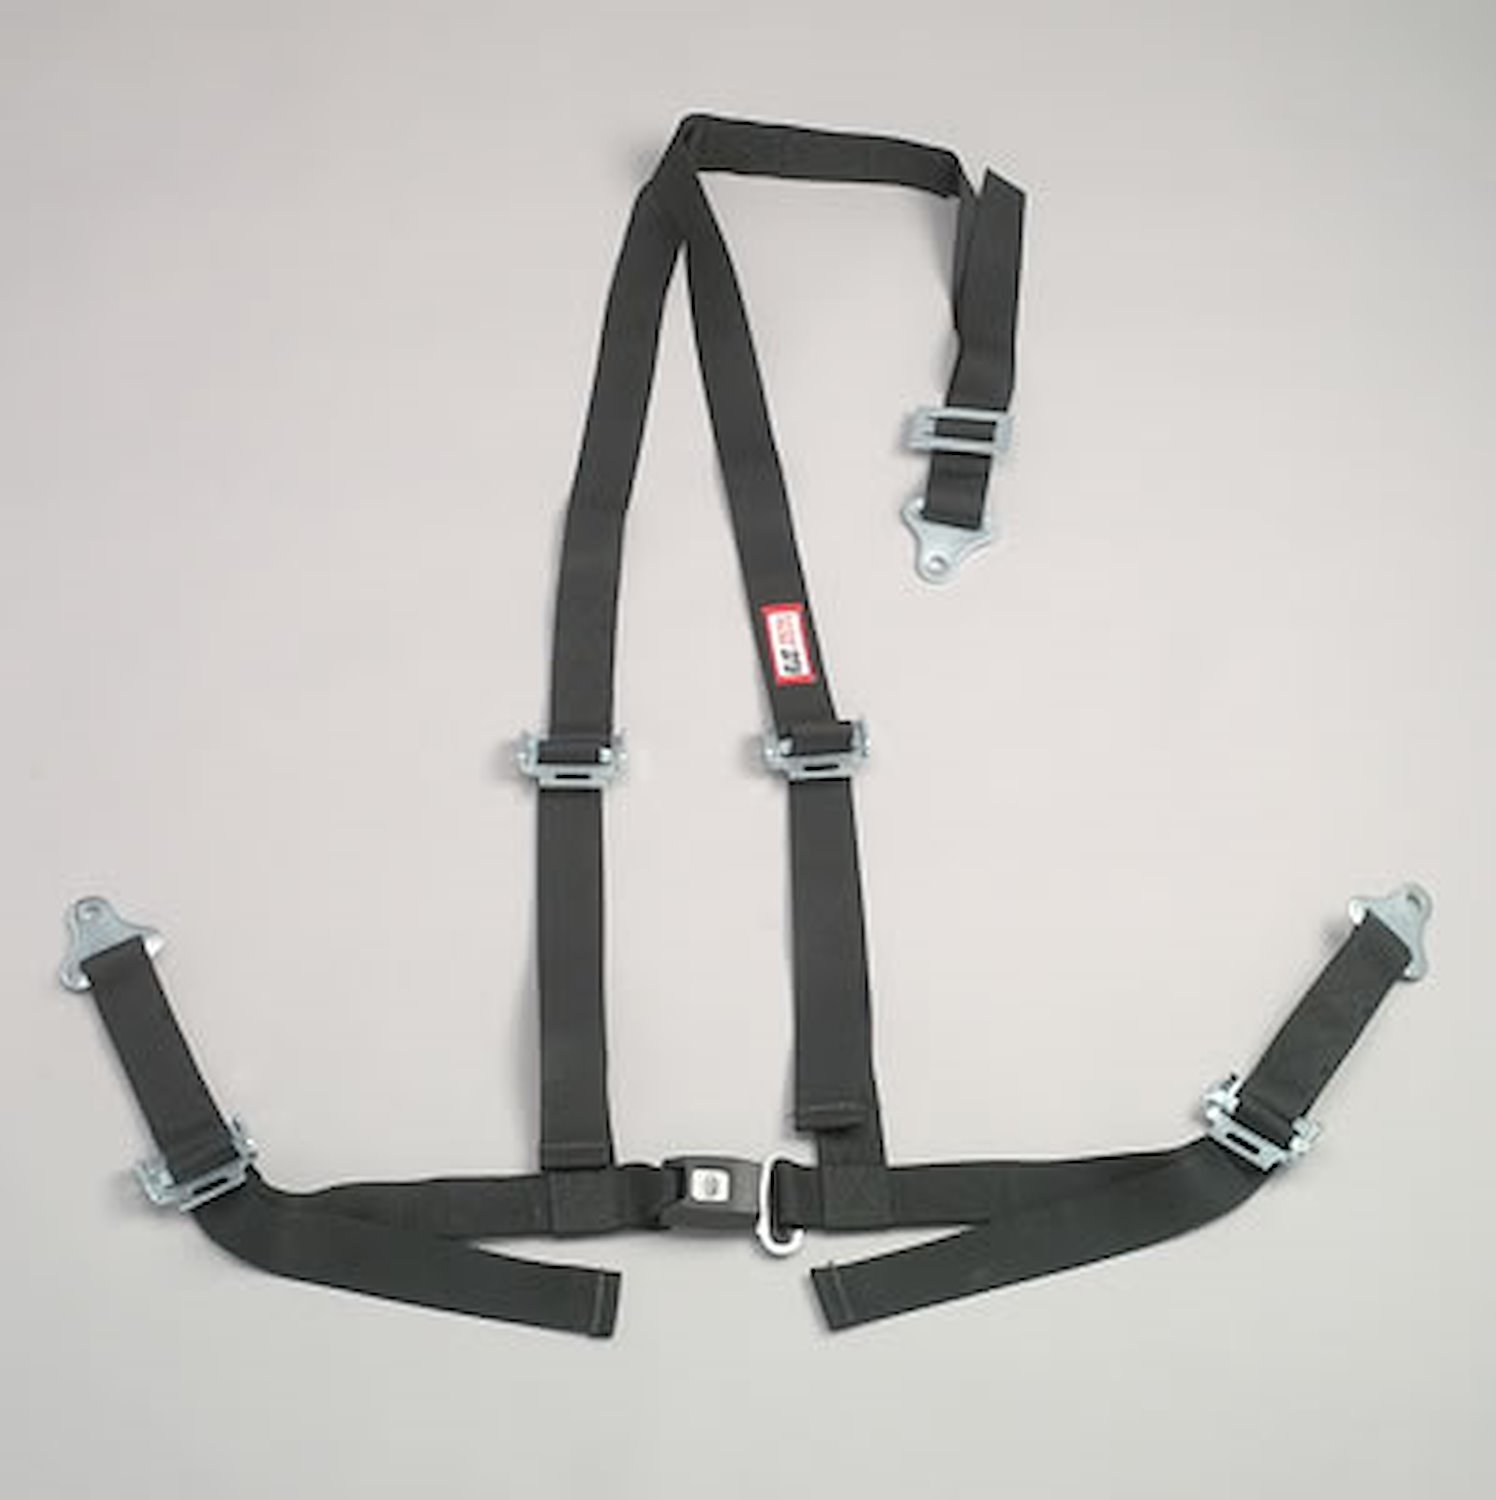 NON-SFI B&T HARNESS 2 PULL DOWN Lap Belt 2 S. H. Individual ROLL BAR Mount ALL WRAP ENDS w/STERNUM STRAP OD GREEN